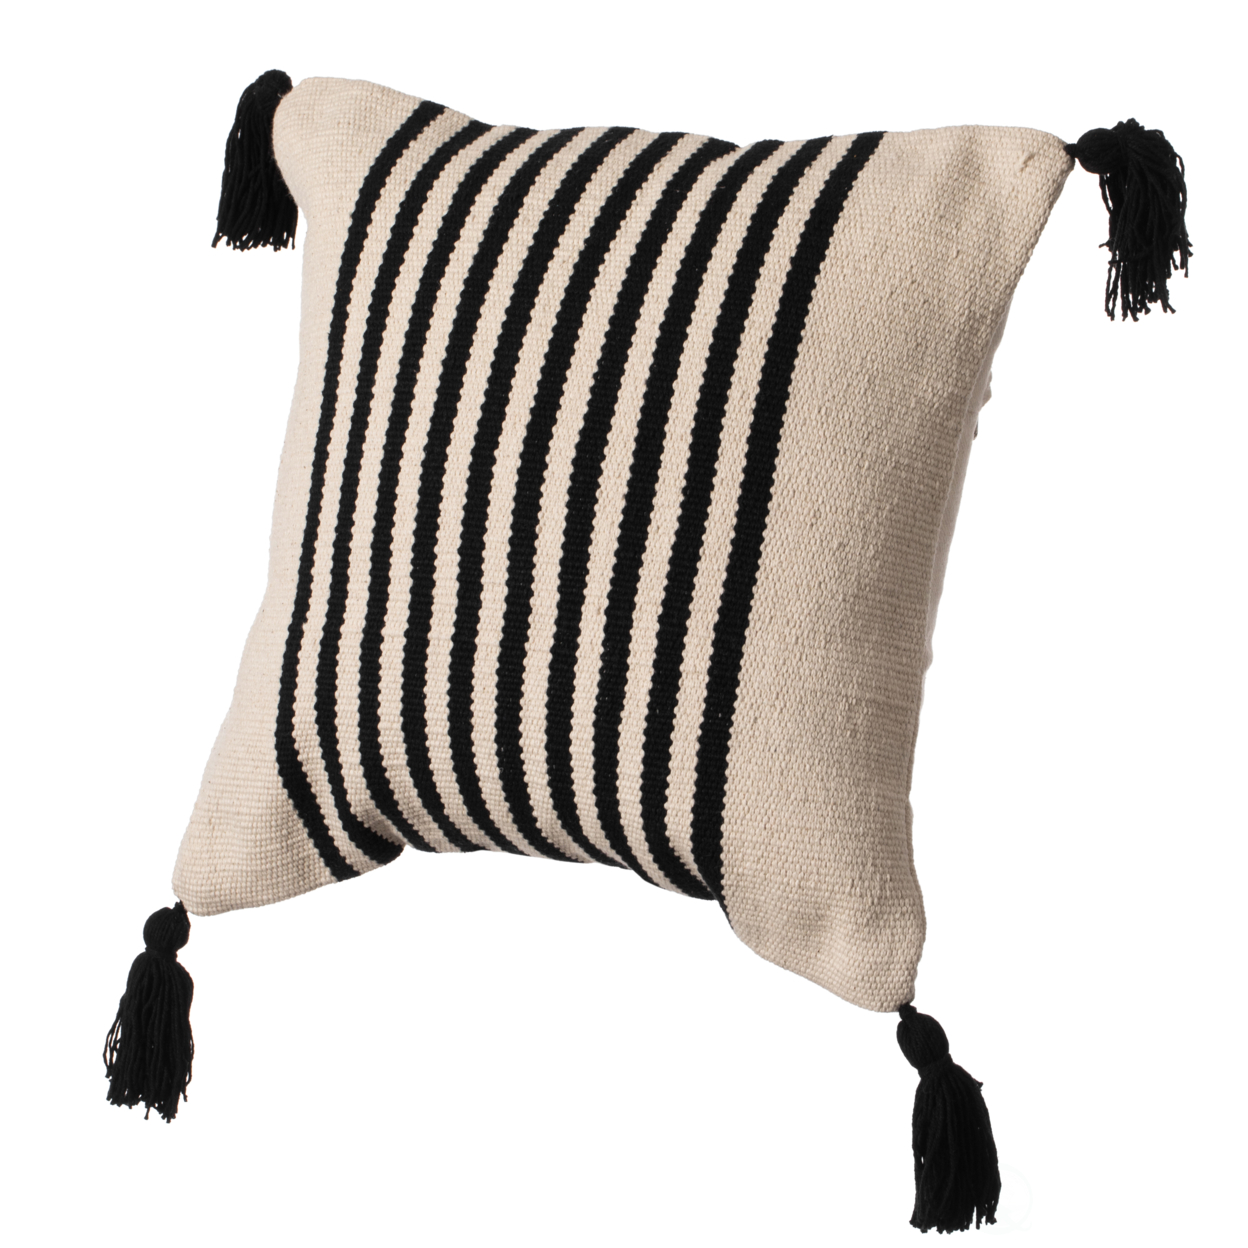 16 Handwoven Cotton Throw Pillow Cover With Striped Lines, Black - Black With Cushion